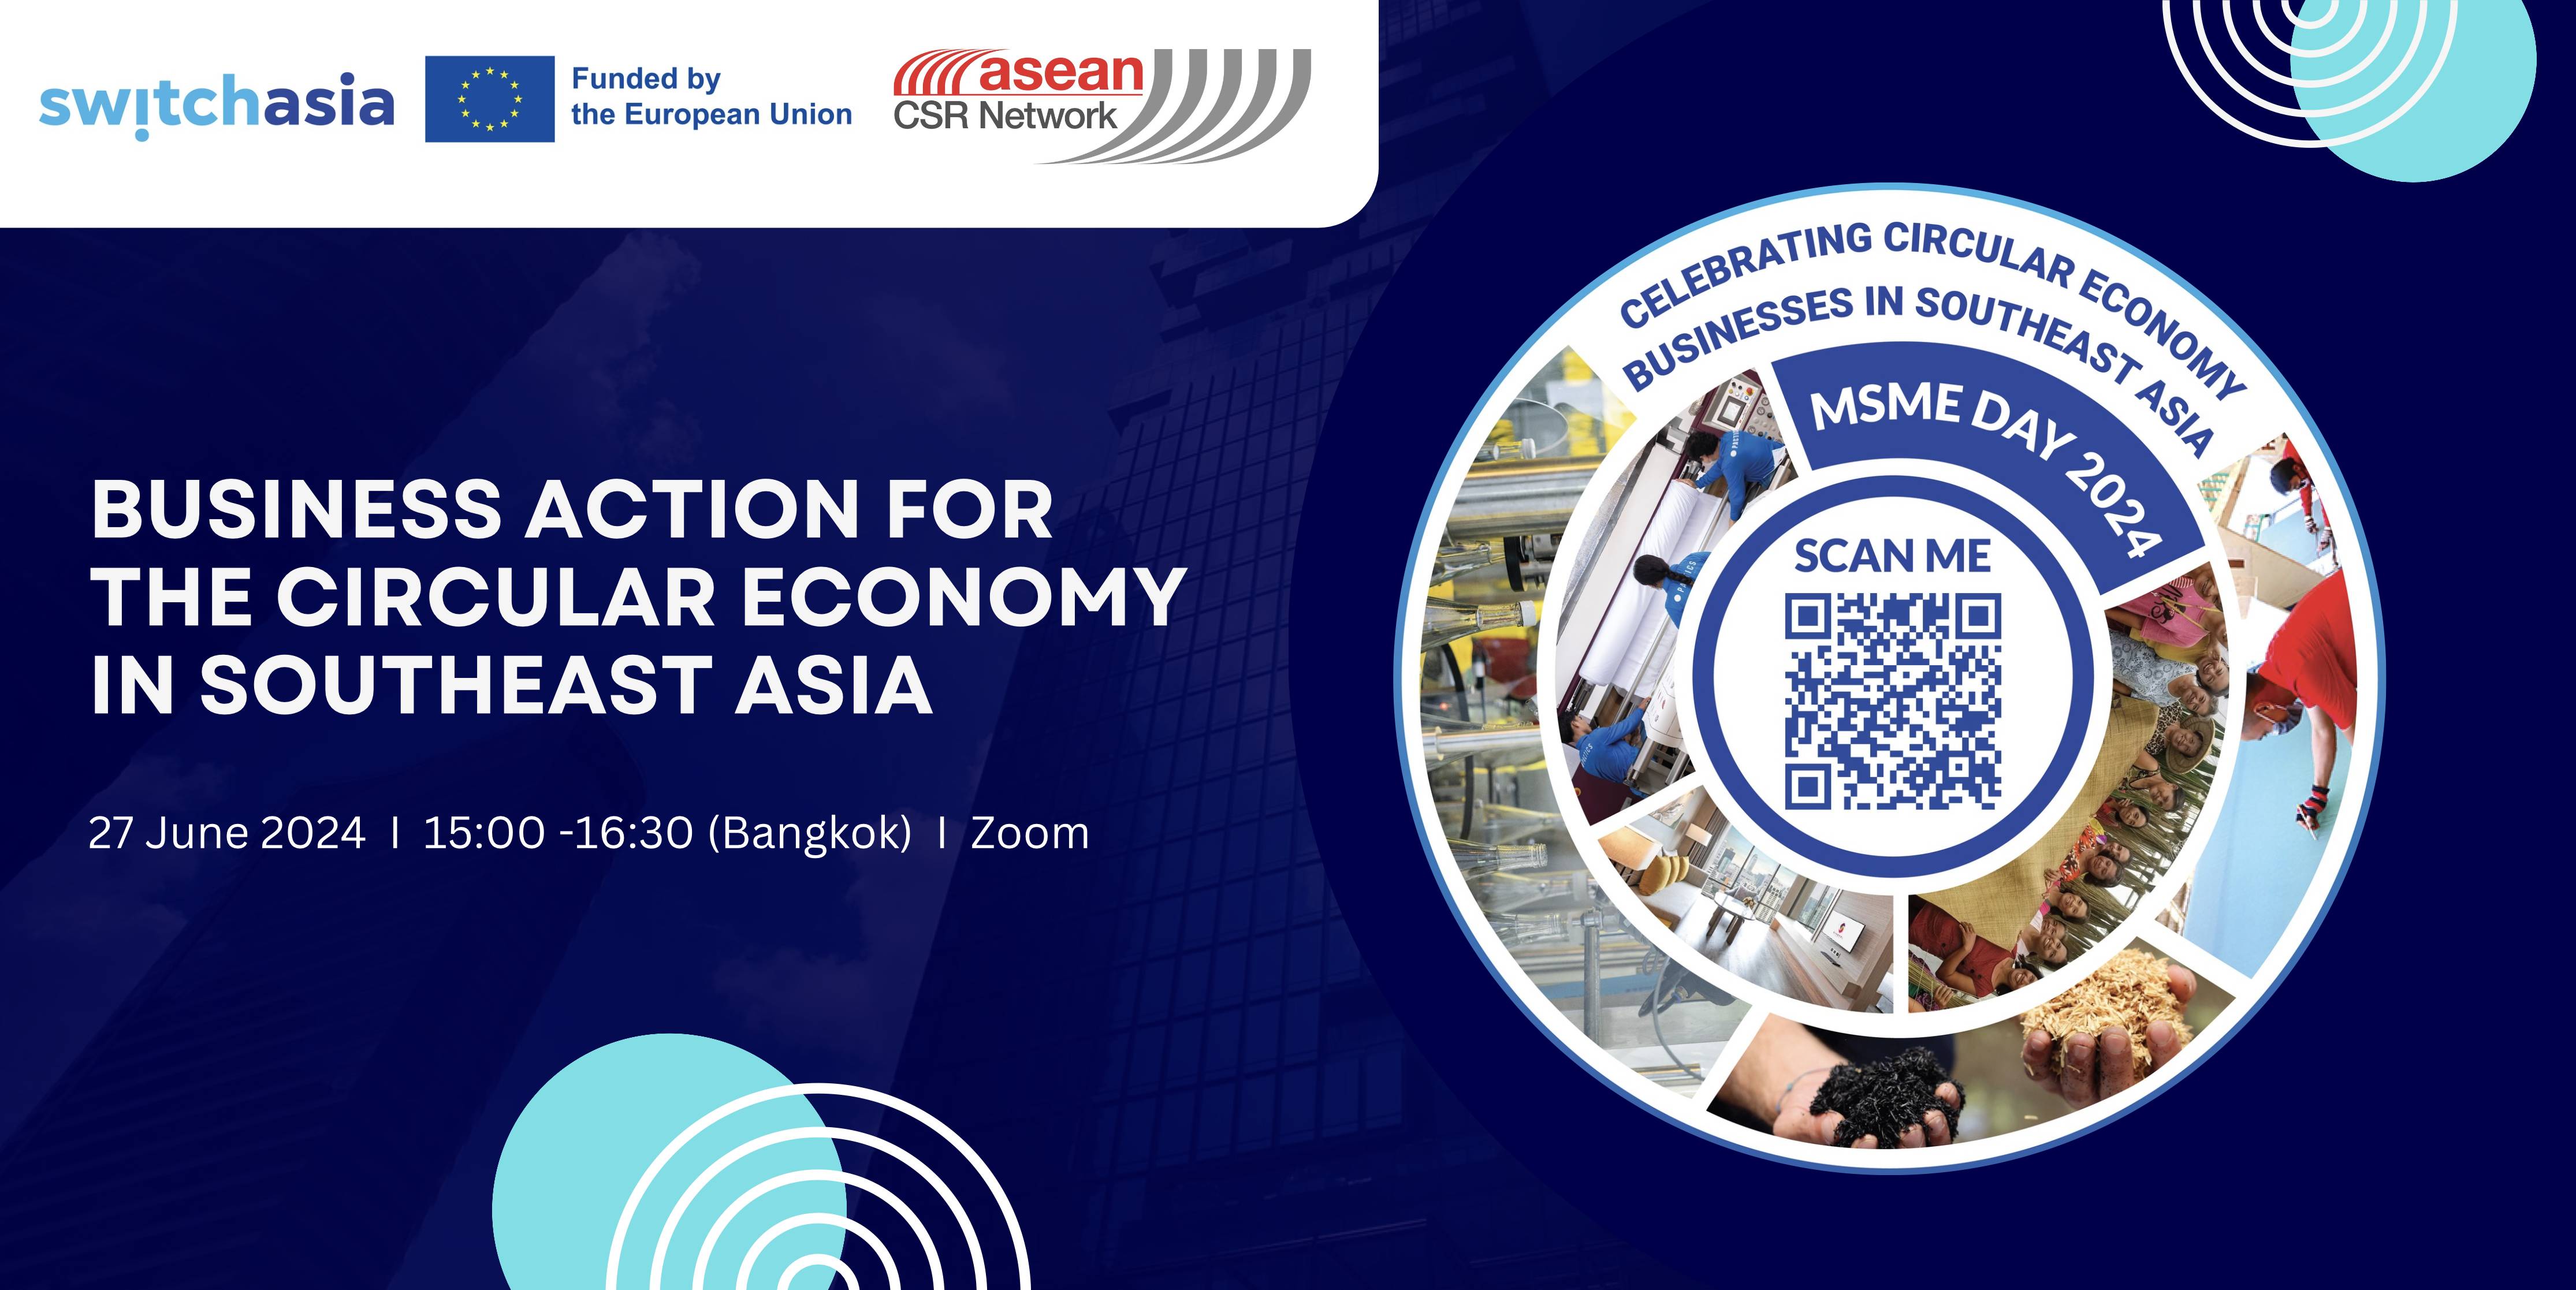 Business Action for the Circular Economy in Southeast Asia